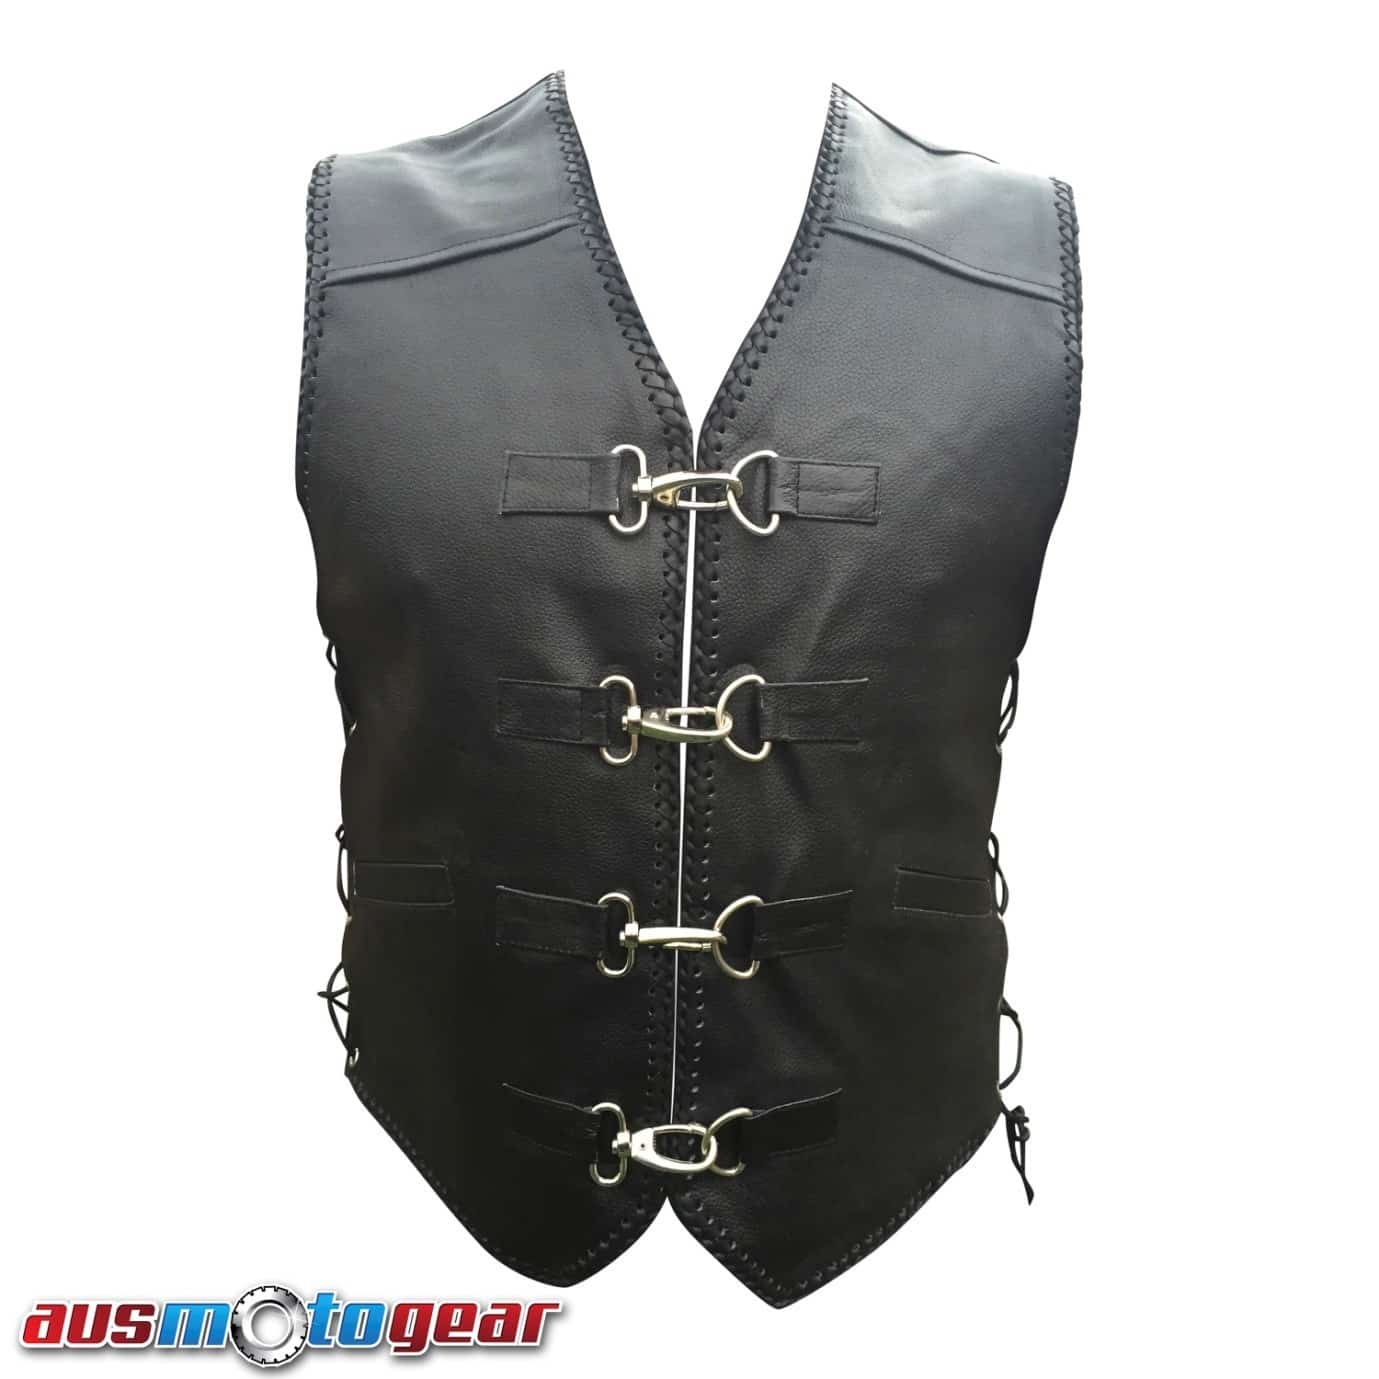 LEATHER VEST DOUBLE HAND BRAIDED 4 Buckles